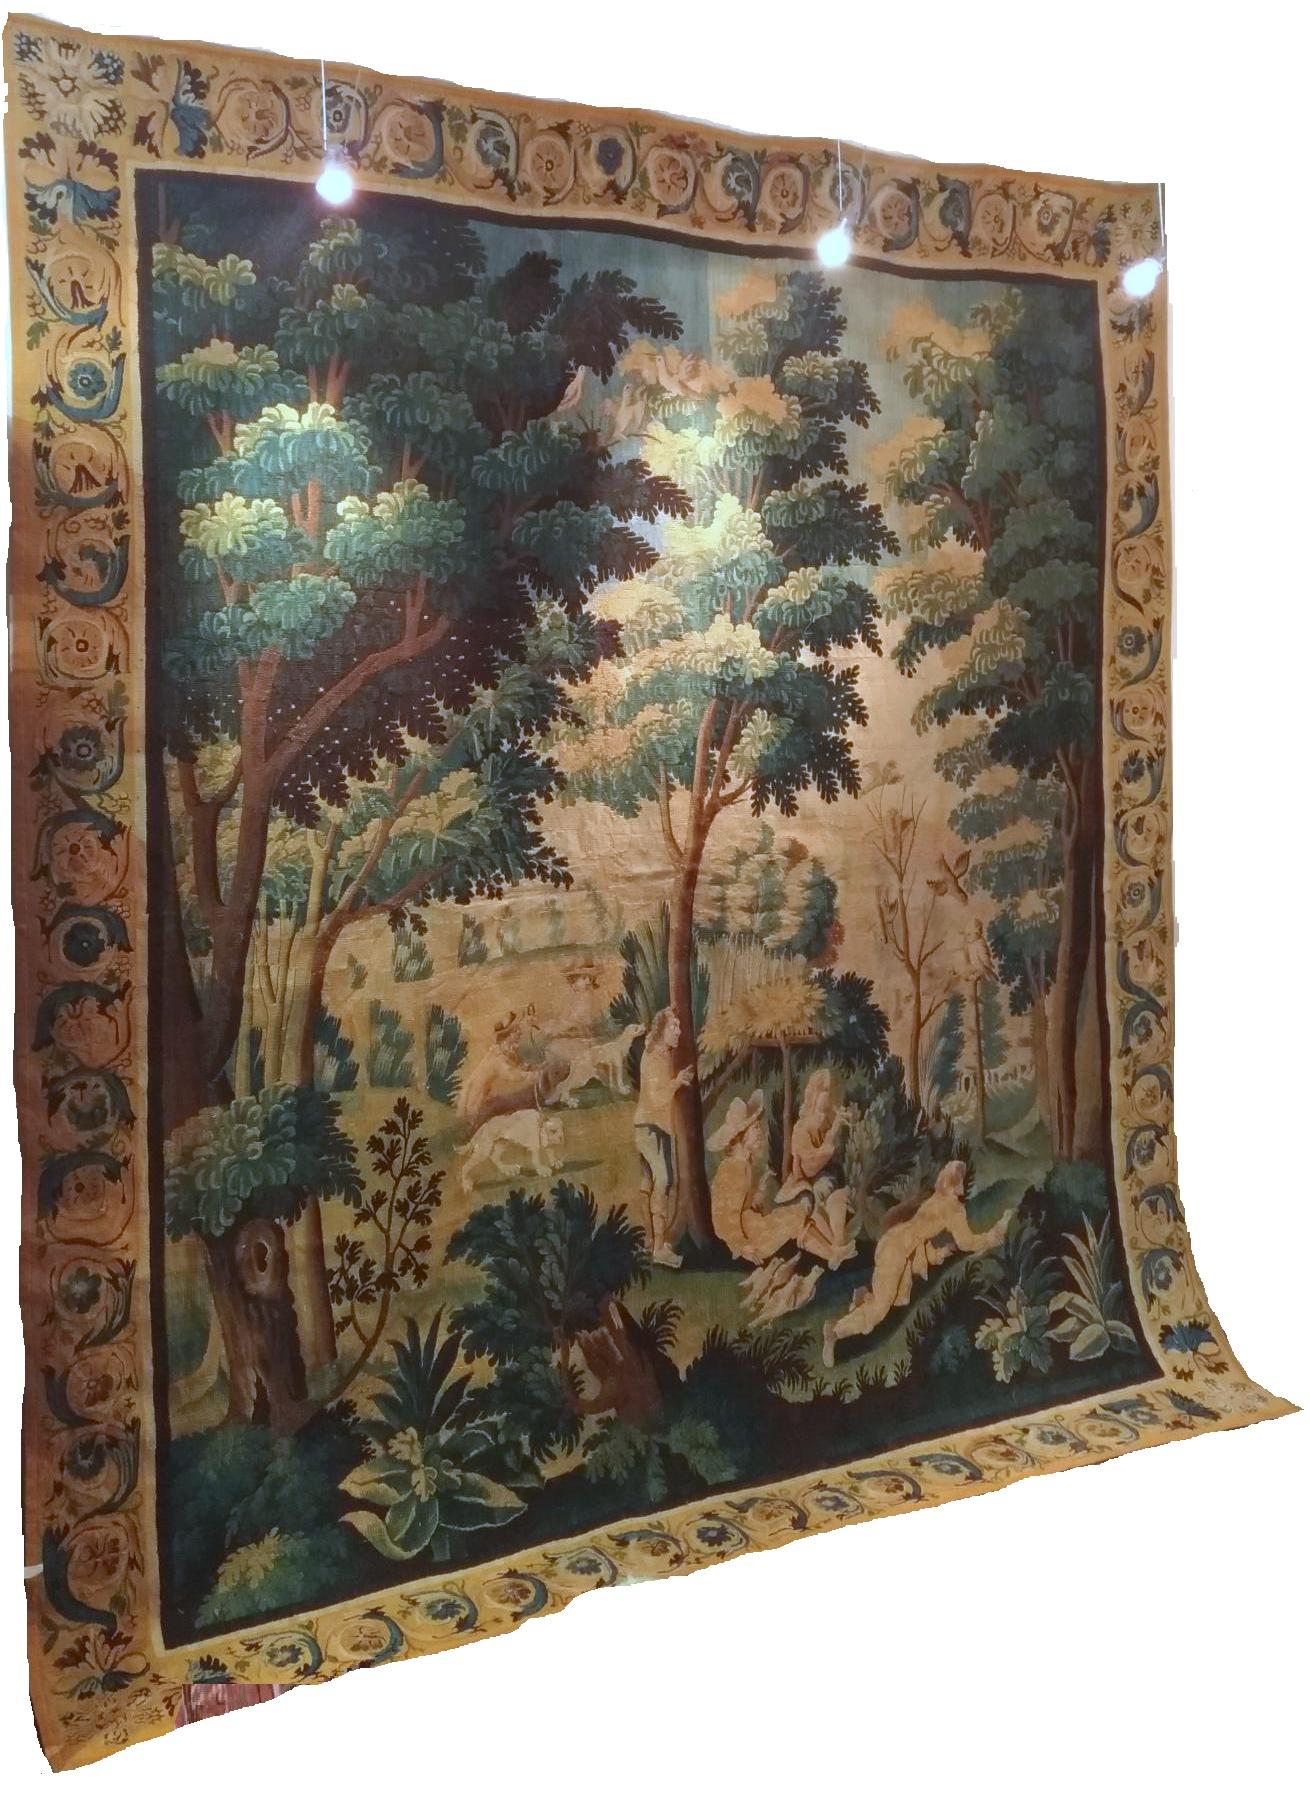 1077 - 18th century tapestry from the Aubusson Manufacture.
Representation The Capture Of Birds
Perfect state of conservation.